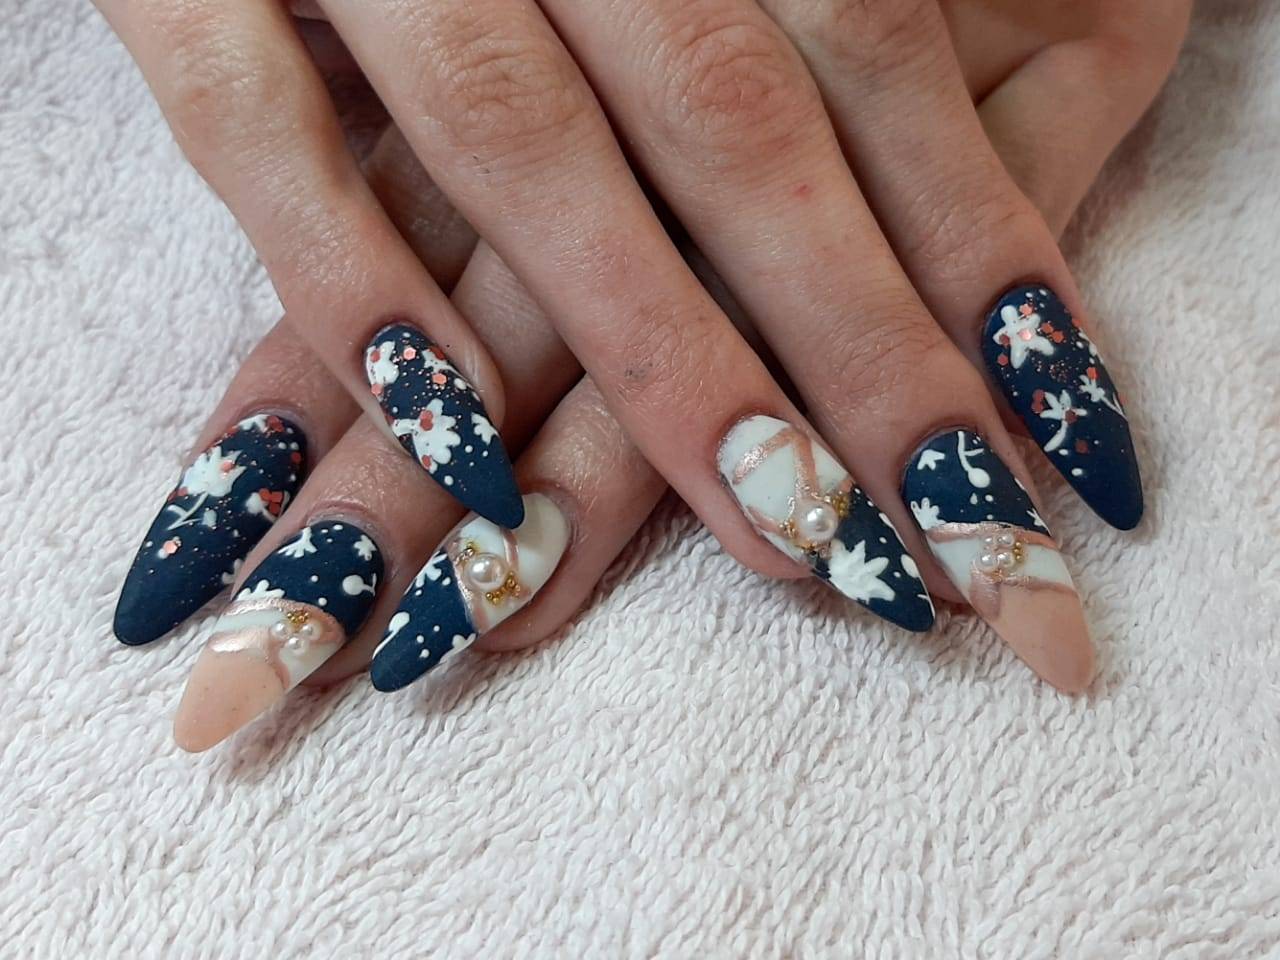 2. Easy Nail Art Ideas for Beginners - wide 4